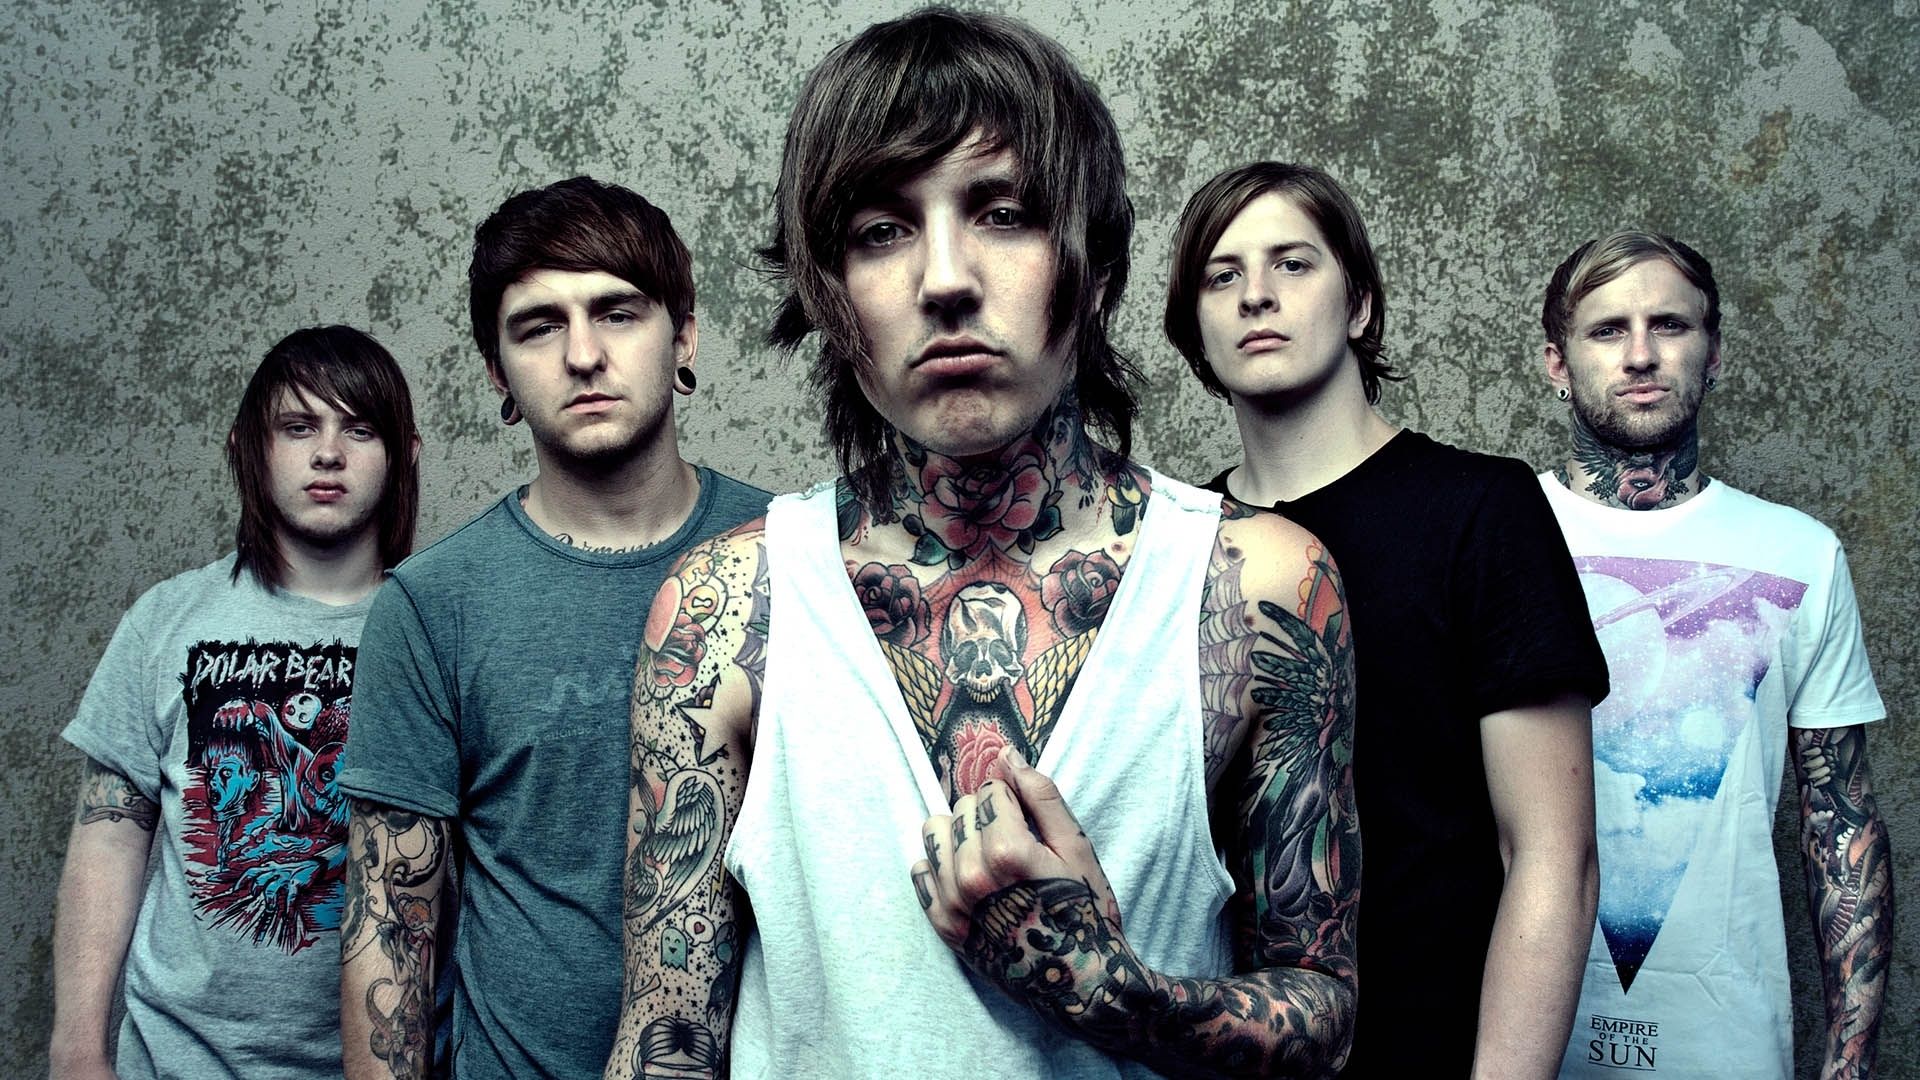 Wallpapers Oliver Sykes Full Hd P I Bring Me The Horizon Tattoo